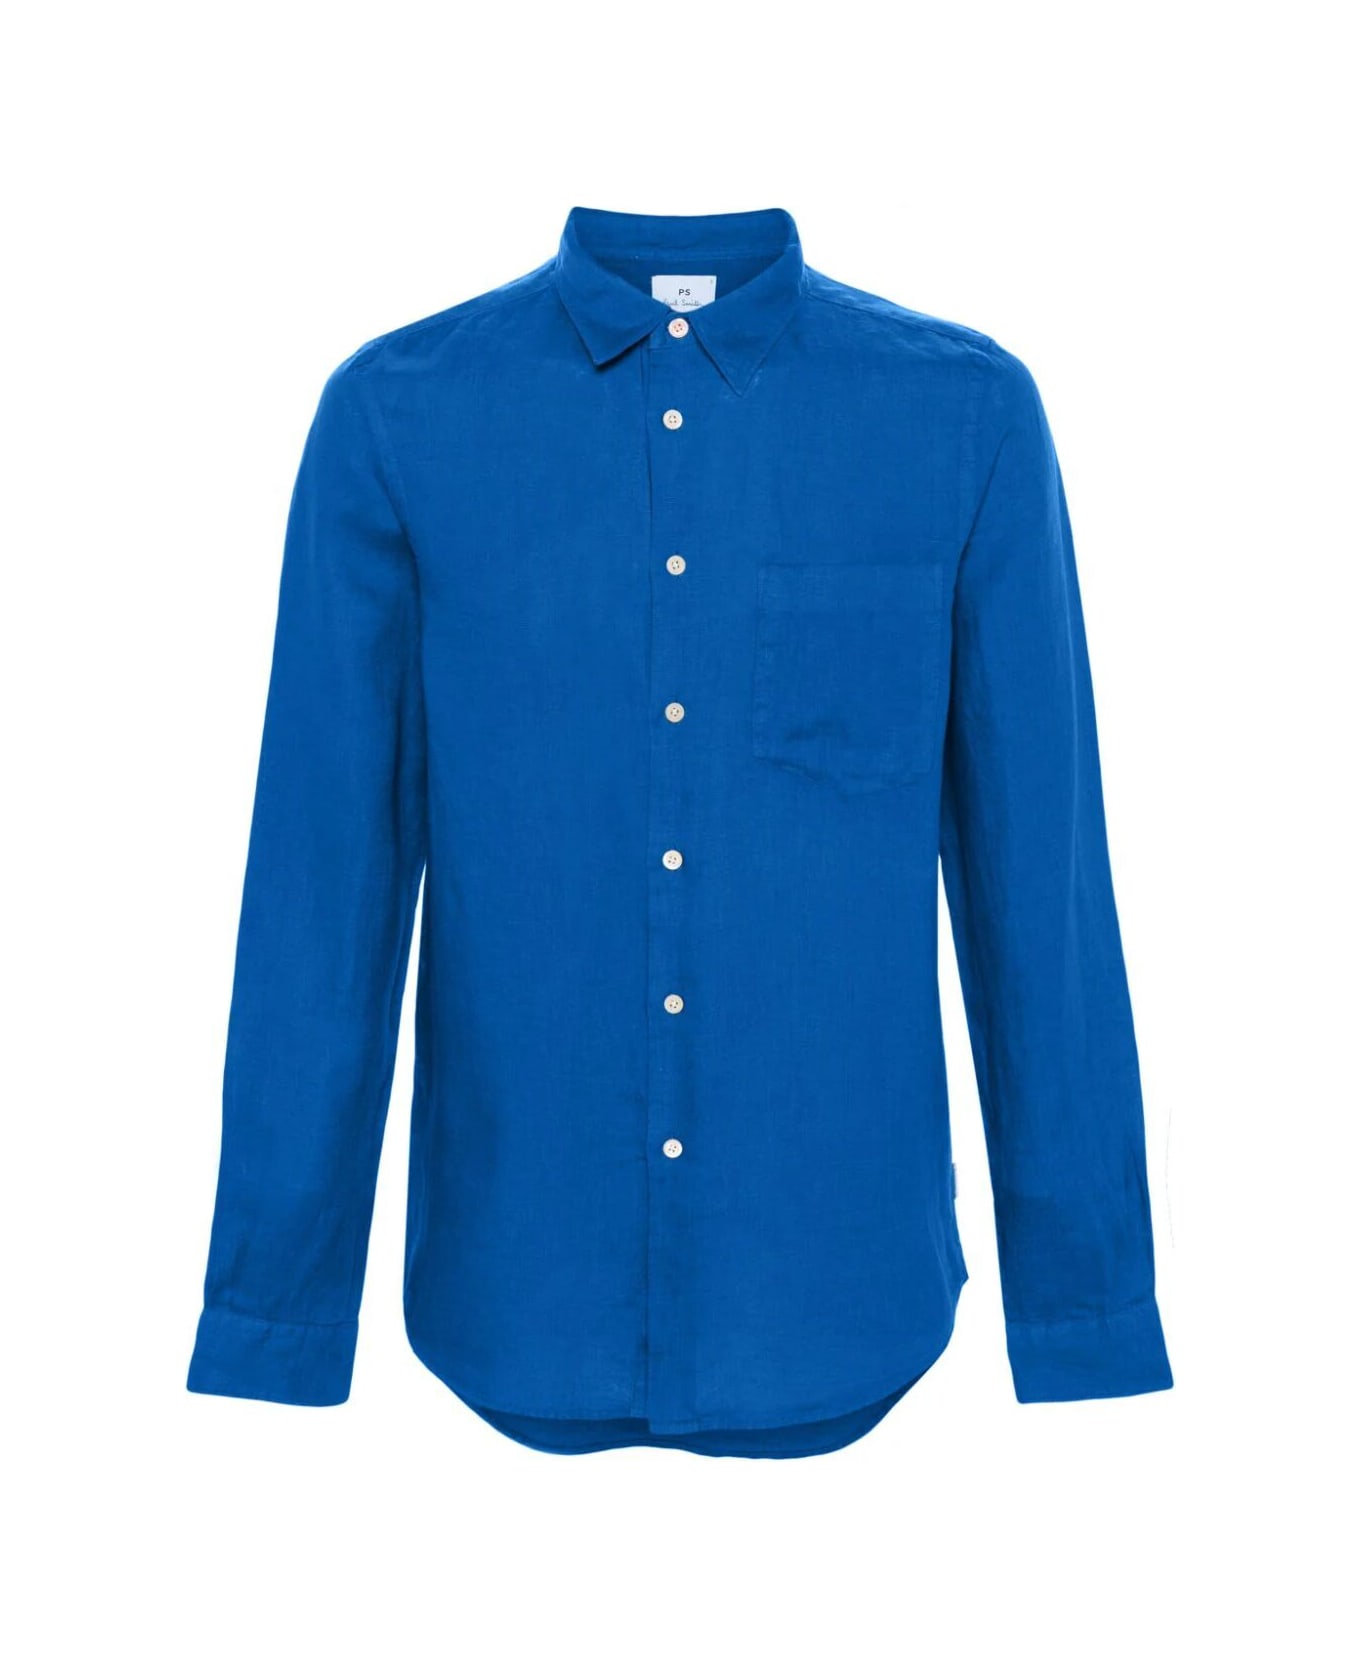 PS by Paul Smith Mens Ls Tailored Fit Shirt - Blues